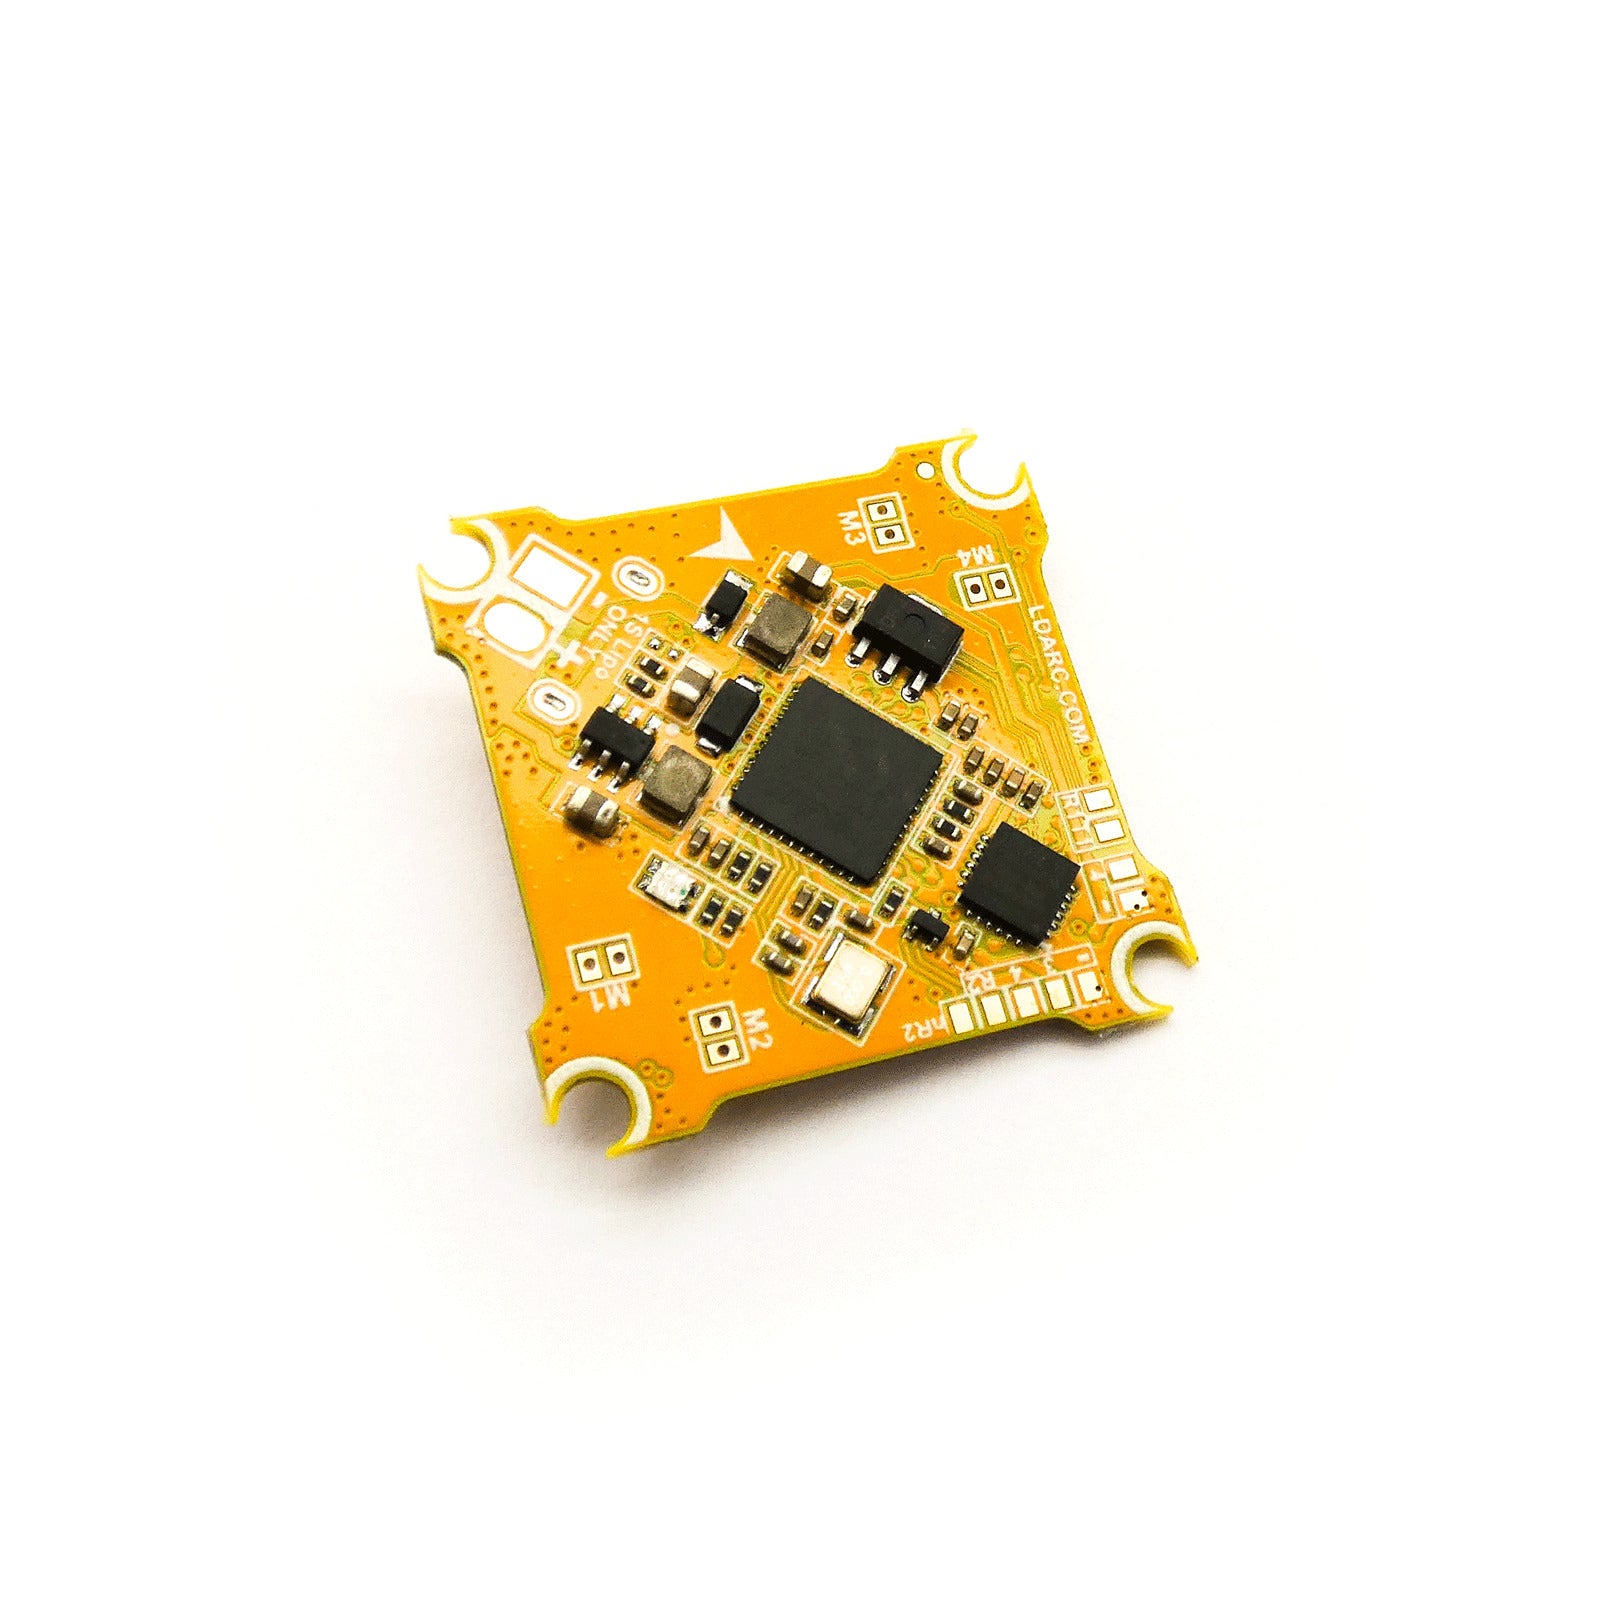 LDARC F411-B2 Brushed Drone Controller with ESC